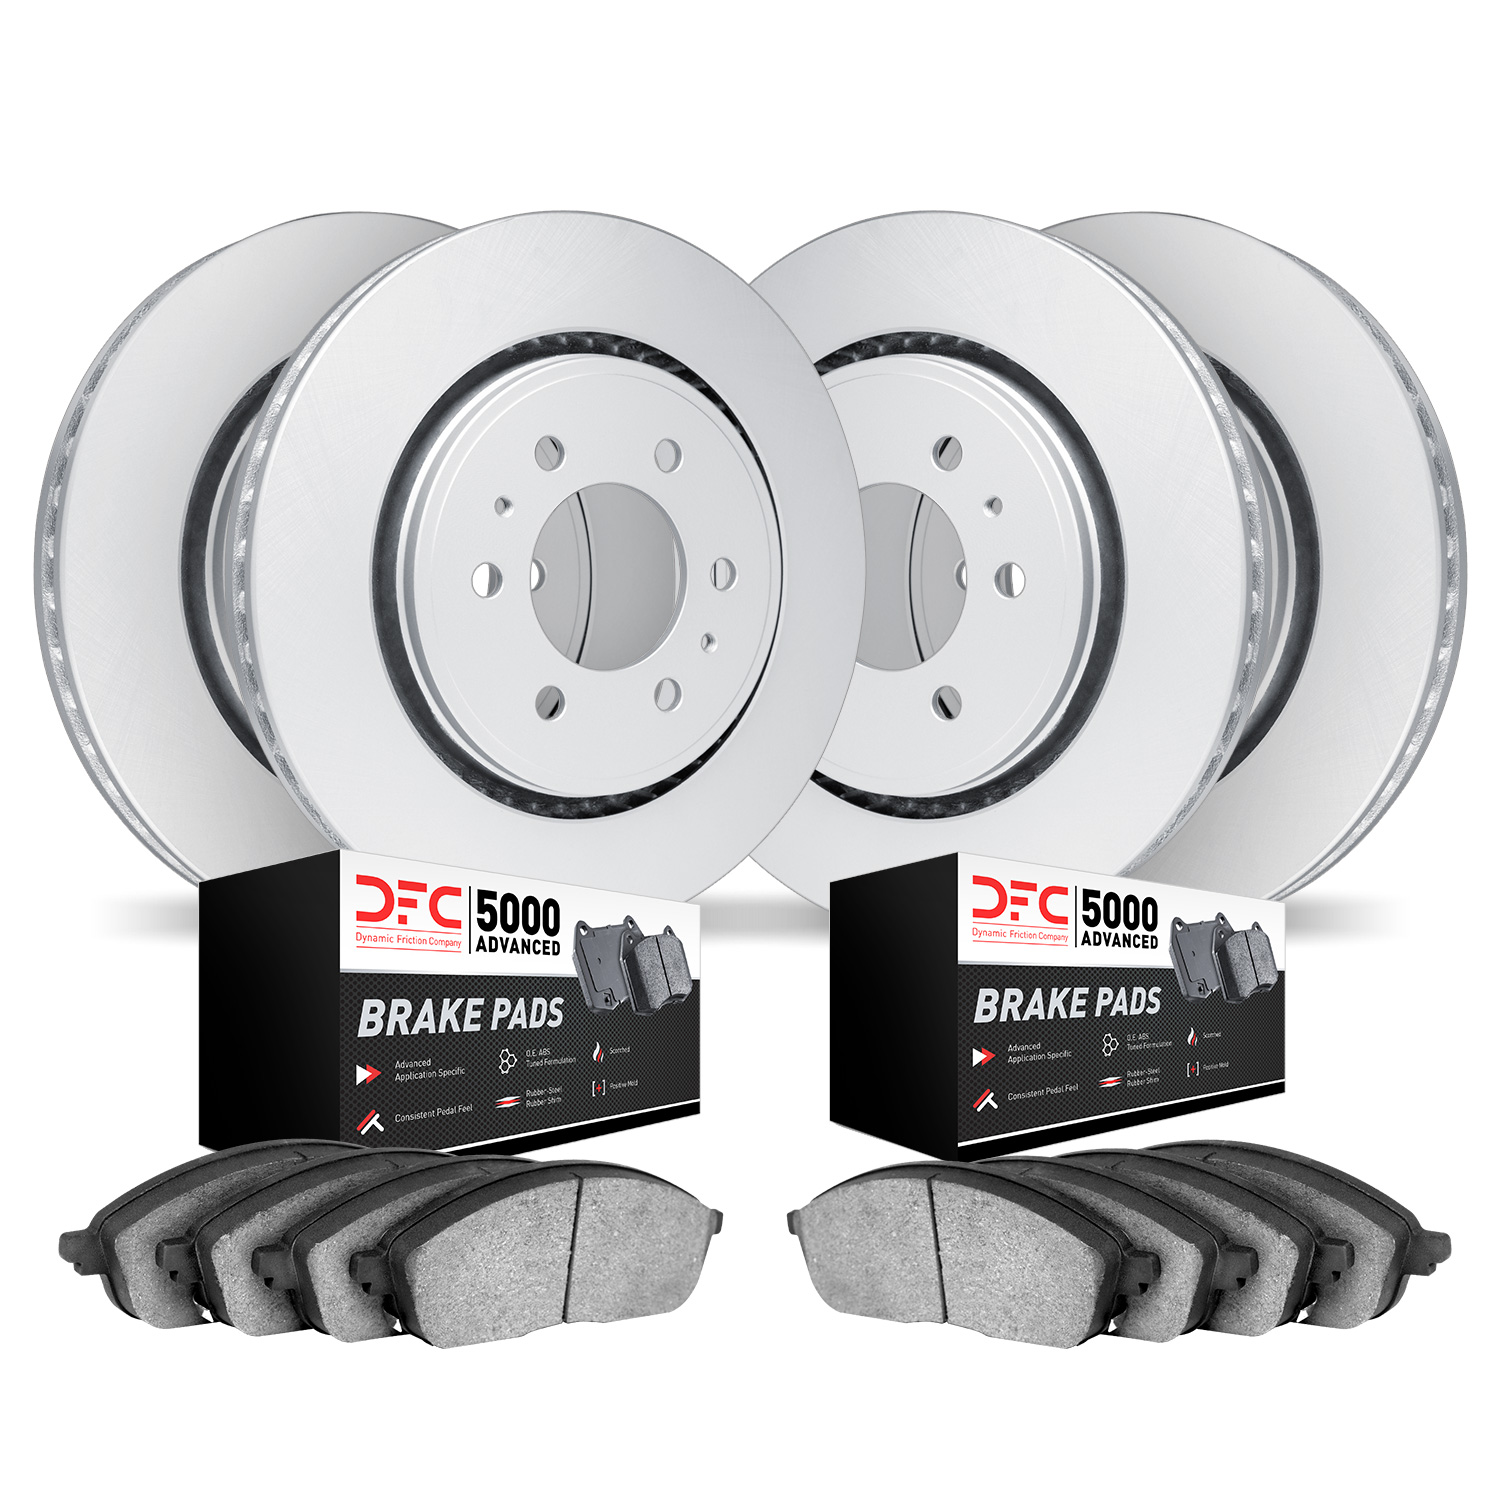 4504-54038 Geospec Brake Rotors w/5000 Advanced Brake Pads Kit, 2004-2008 Ford/Lincoln/Mercury/Mazda, Position: Front and Rear